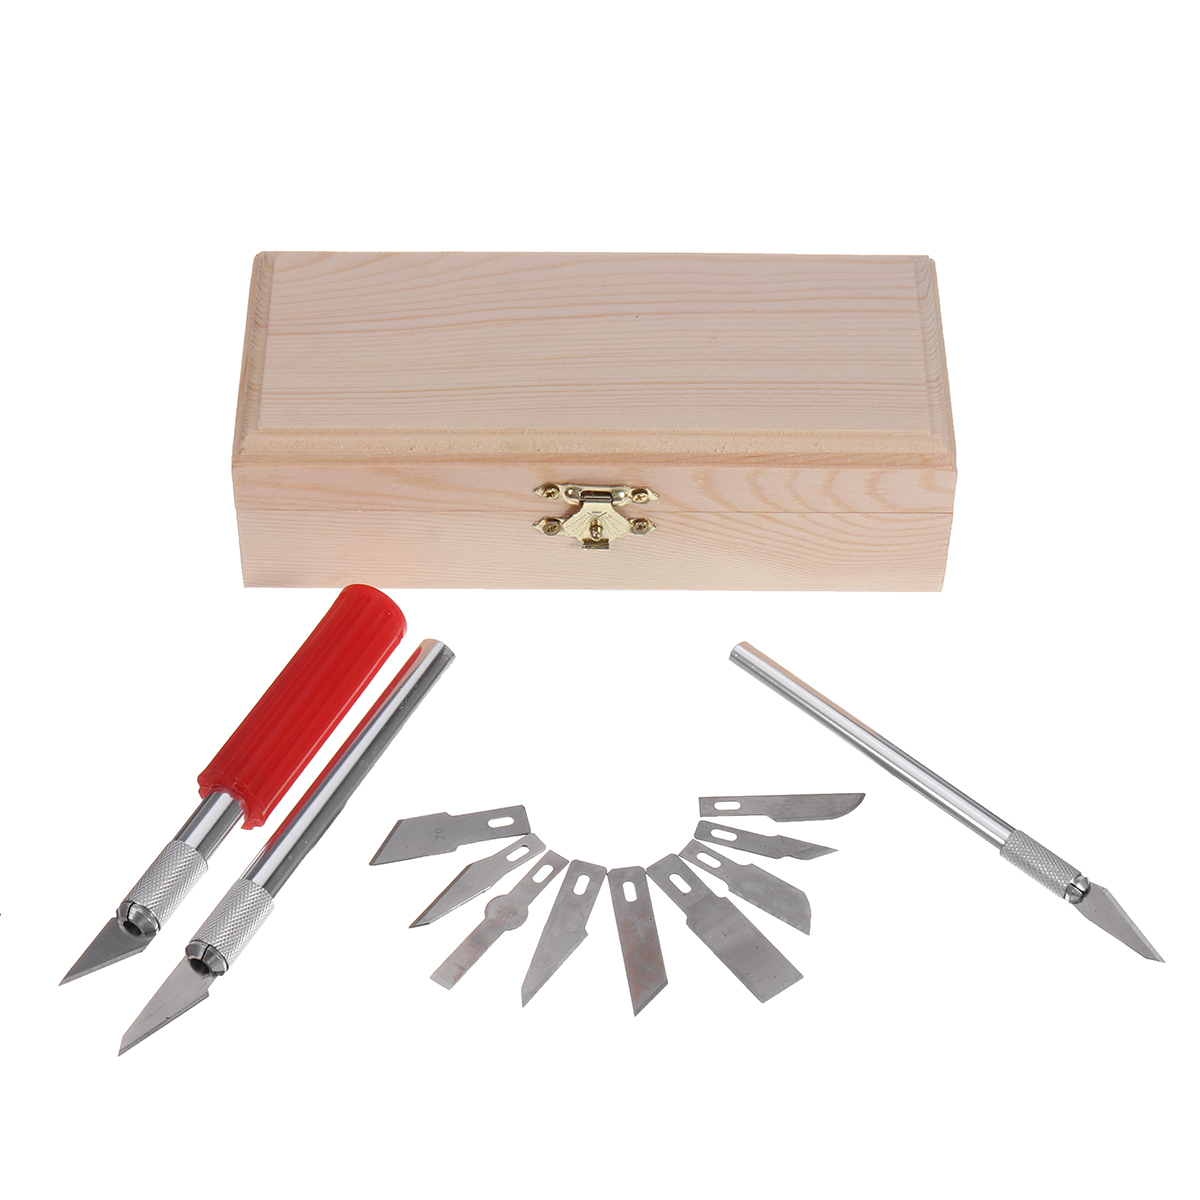 13PcsSet-Carving-Craft-Knive-Pen-Engraving-Blade-Wood-Cutter-Repair-Hand-Tools-Kit-1707554-4